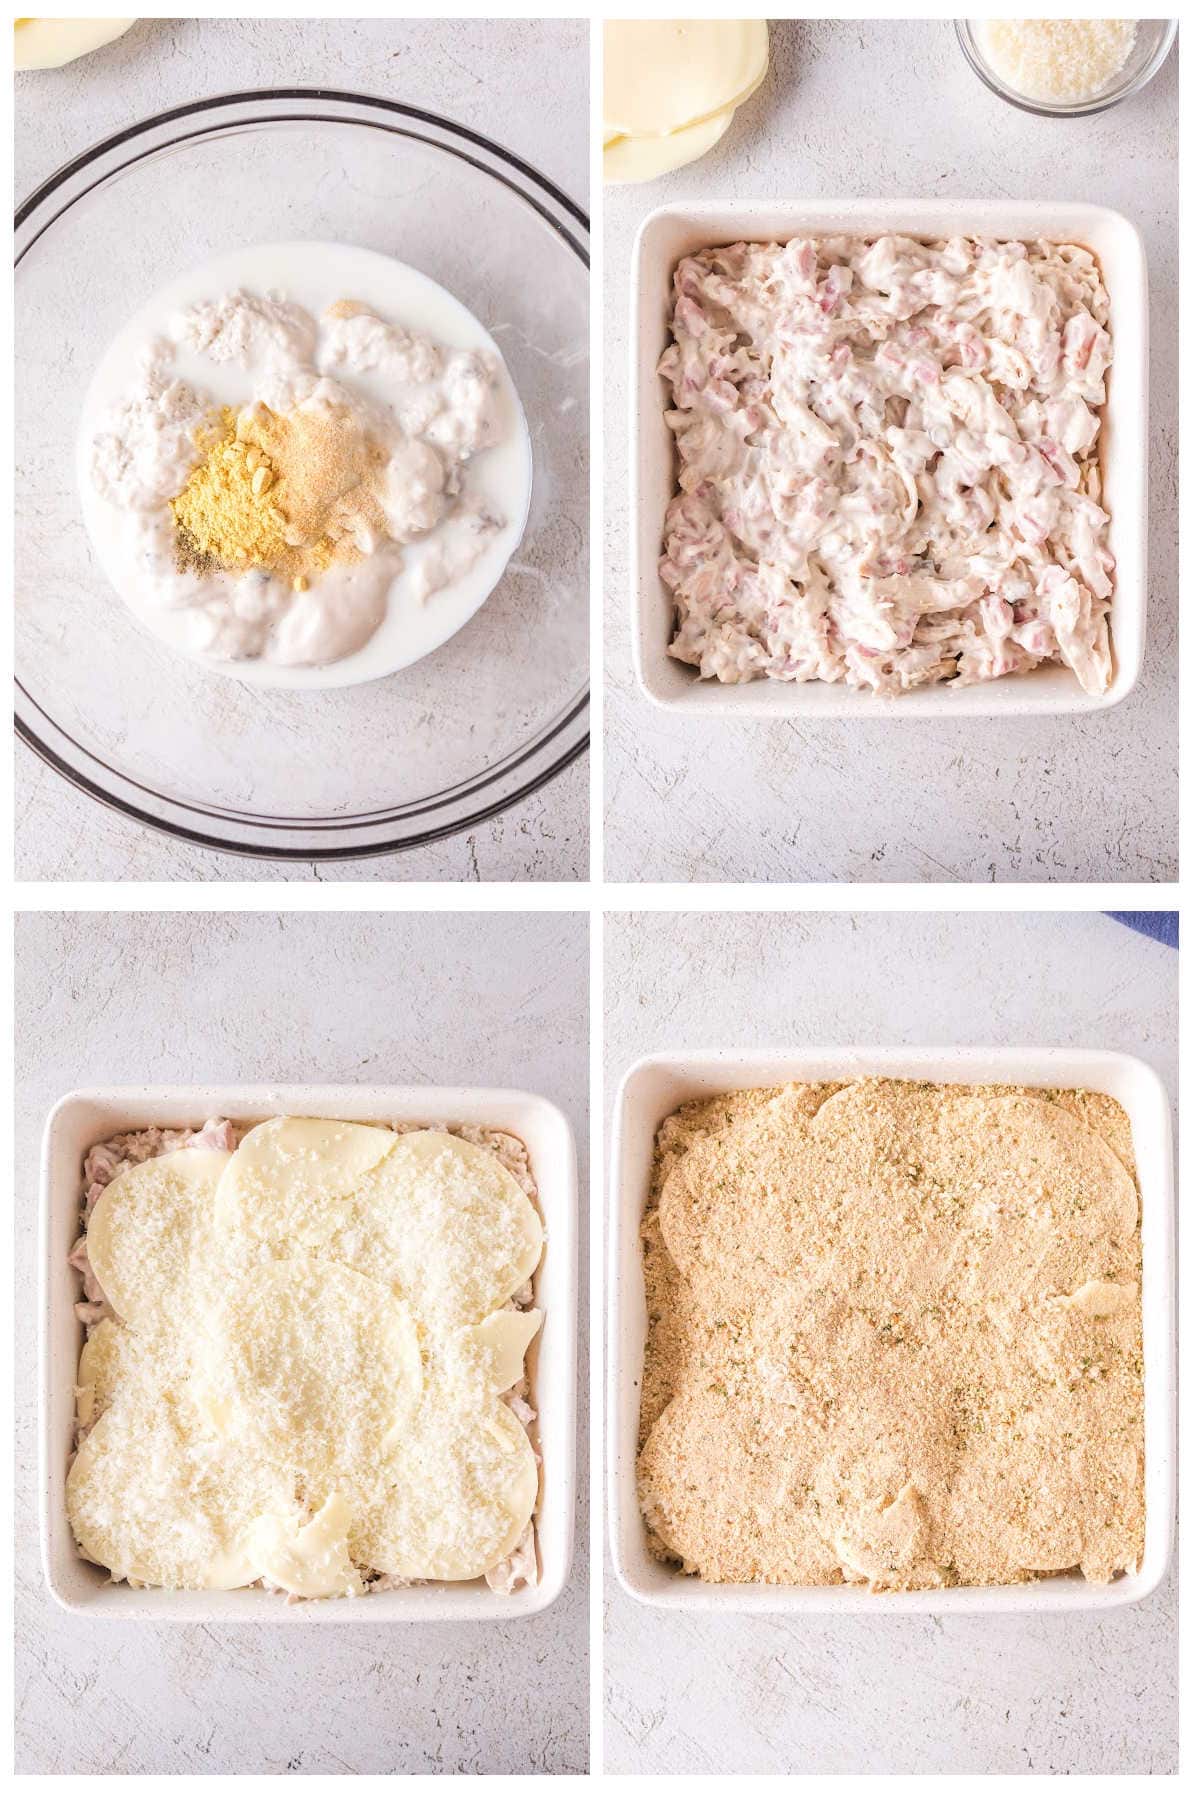 Step by step images showing how to make chicken cordon bleu casserole.